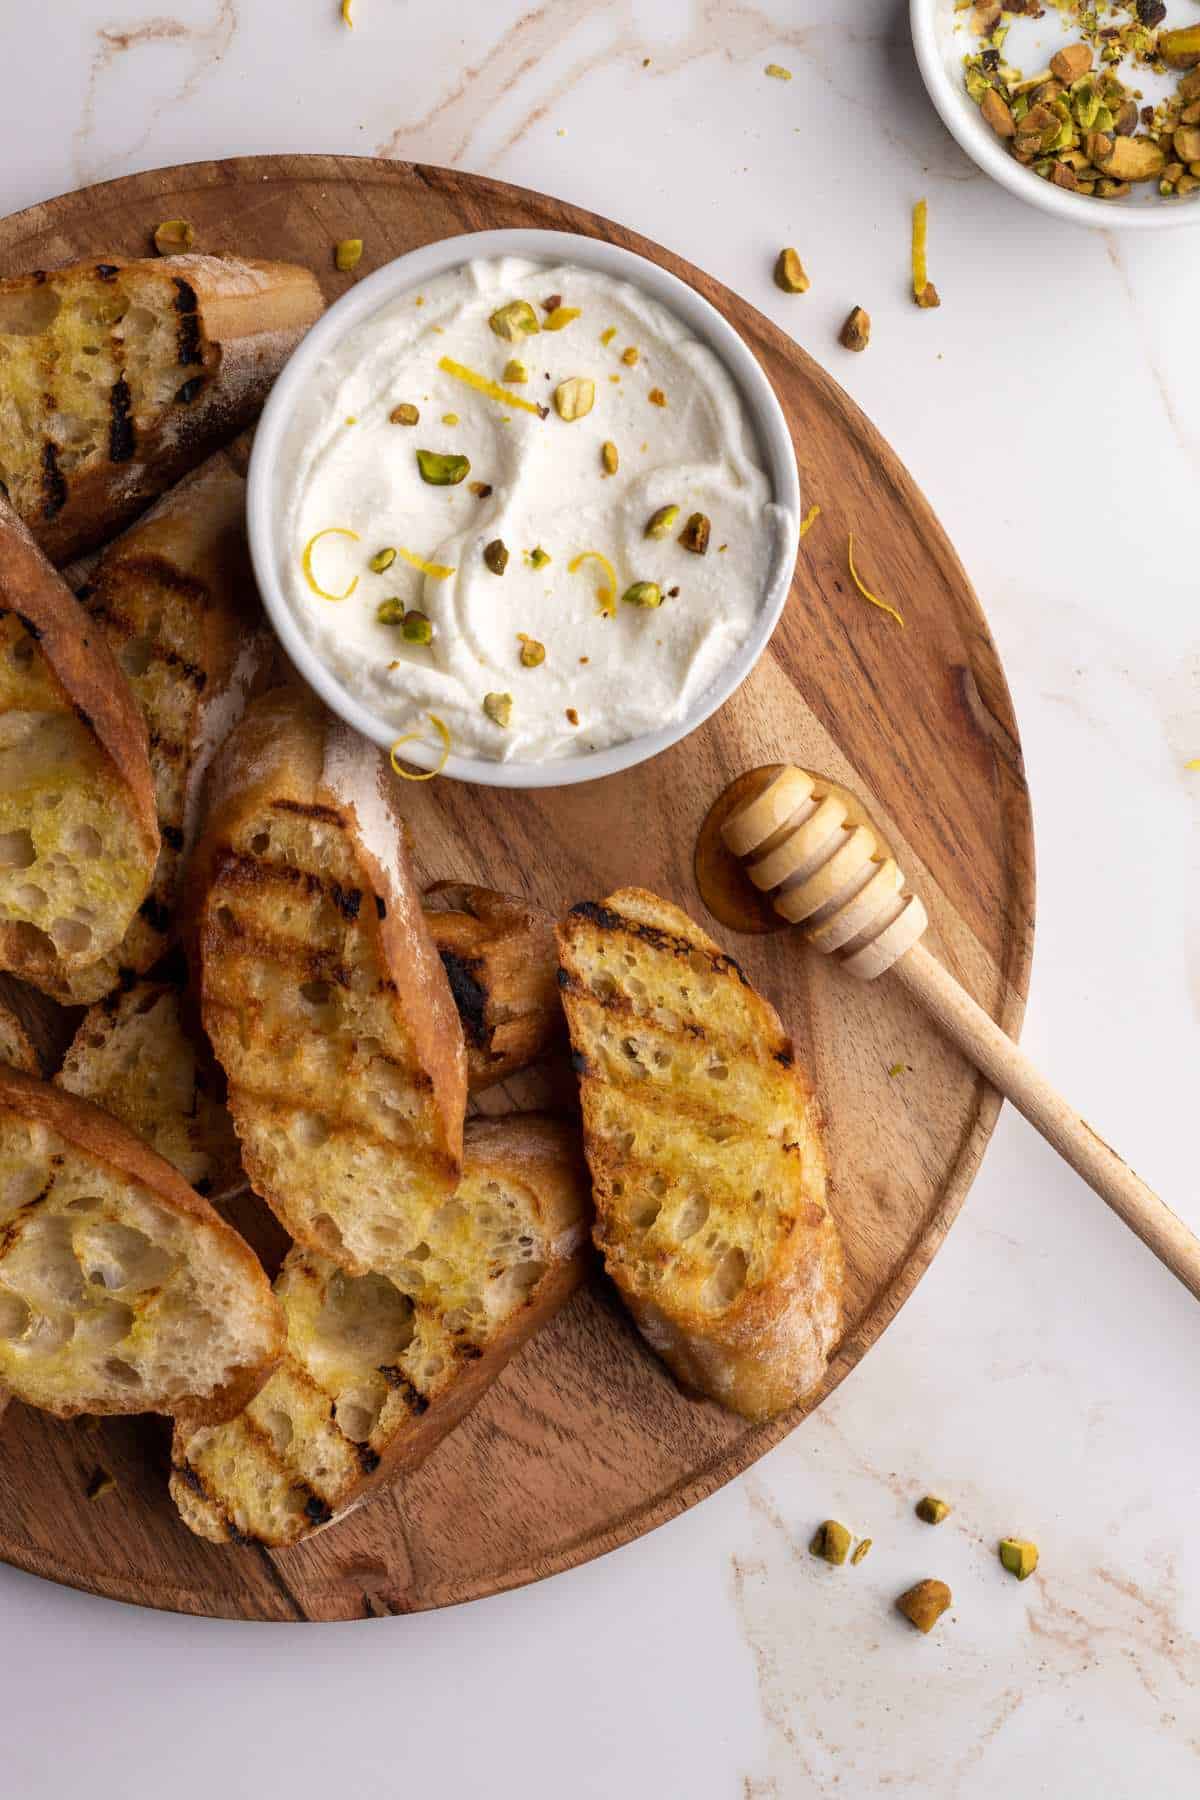 Grilled baguette with whipped ricotta on board.